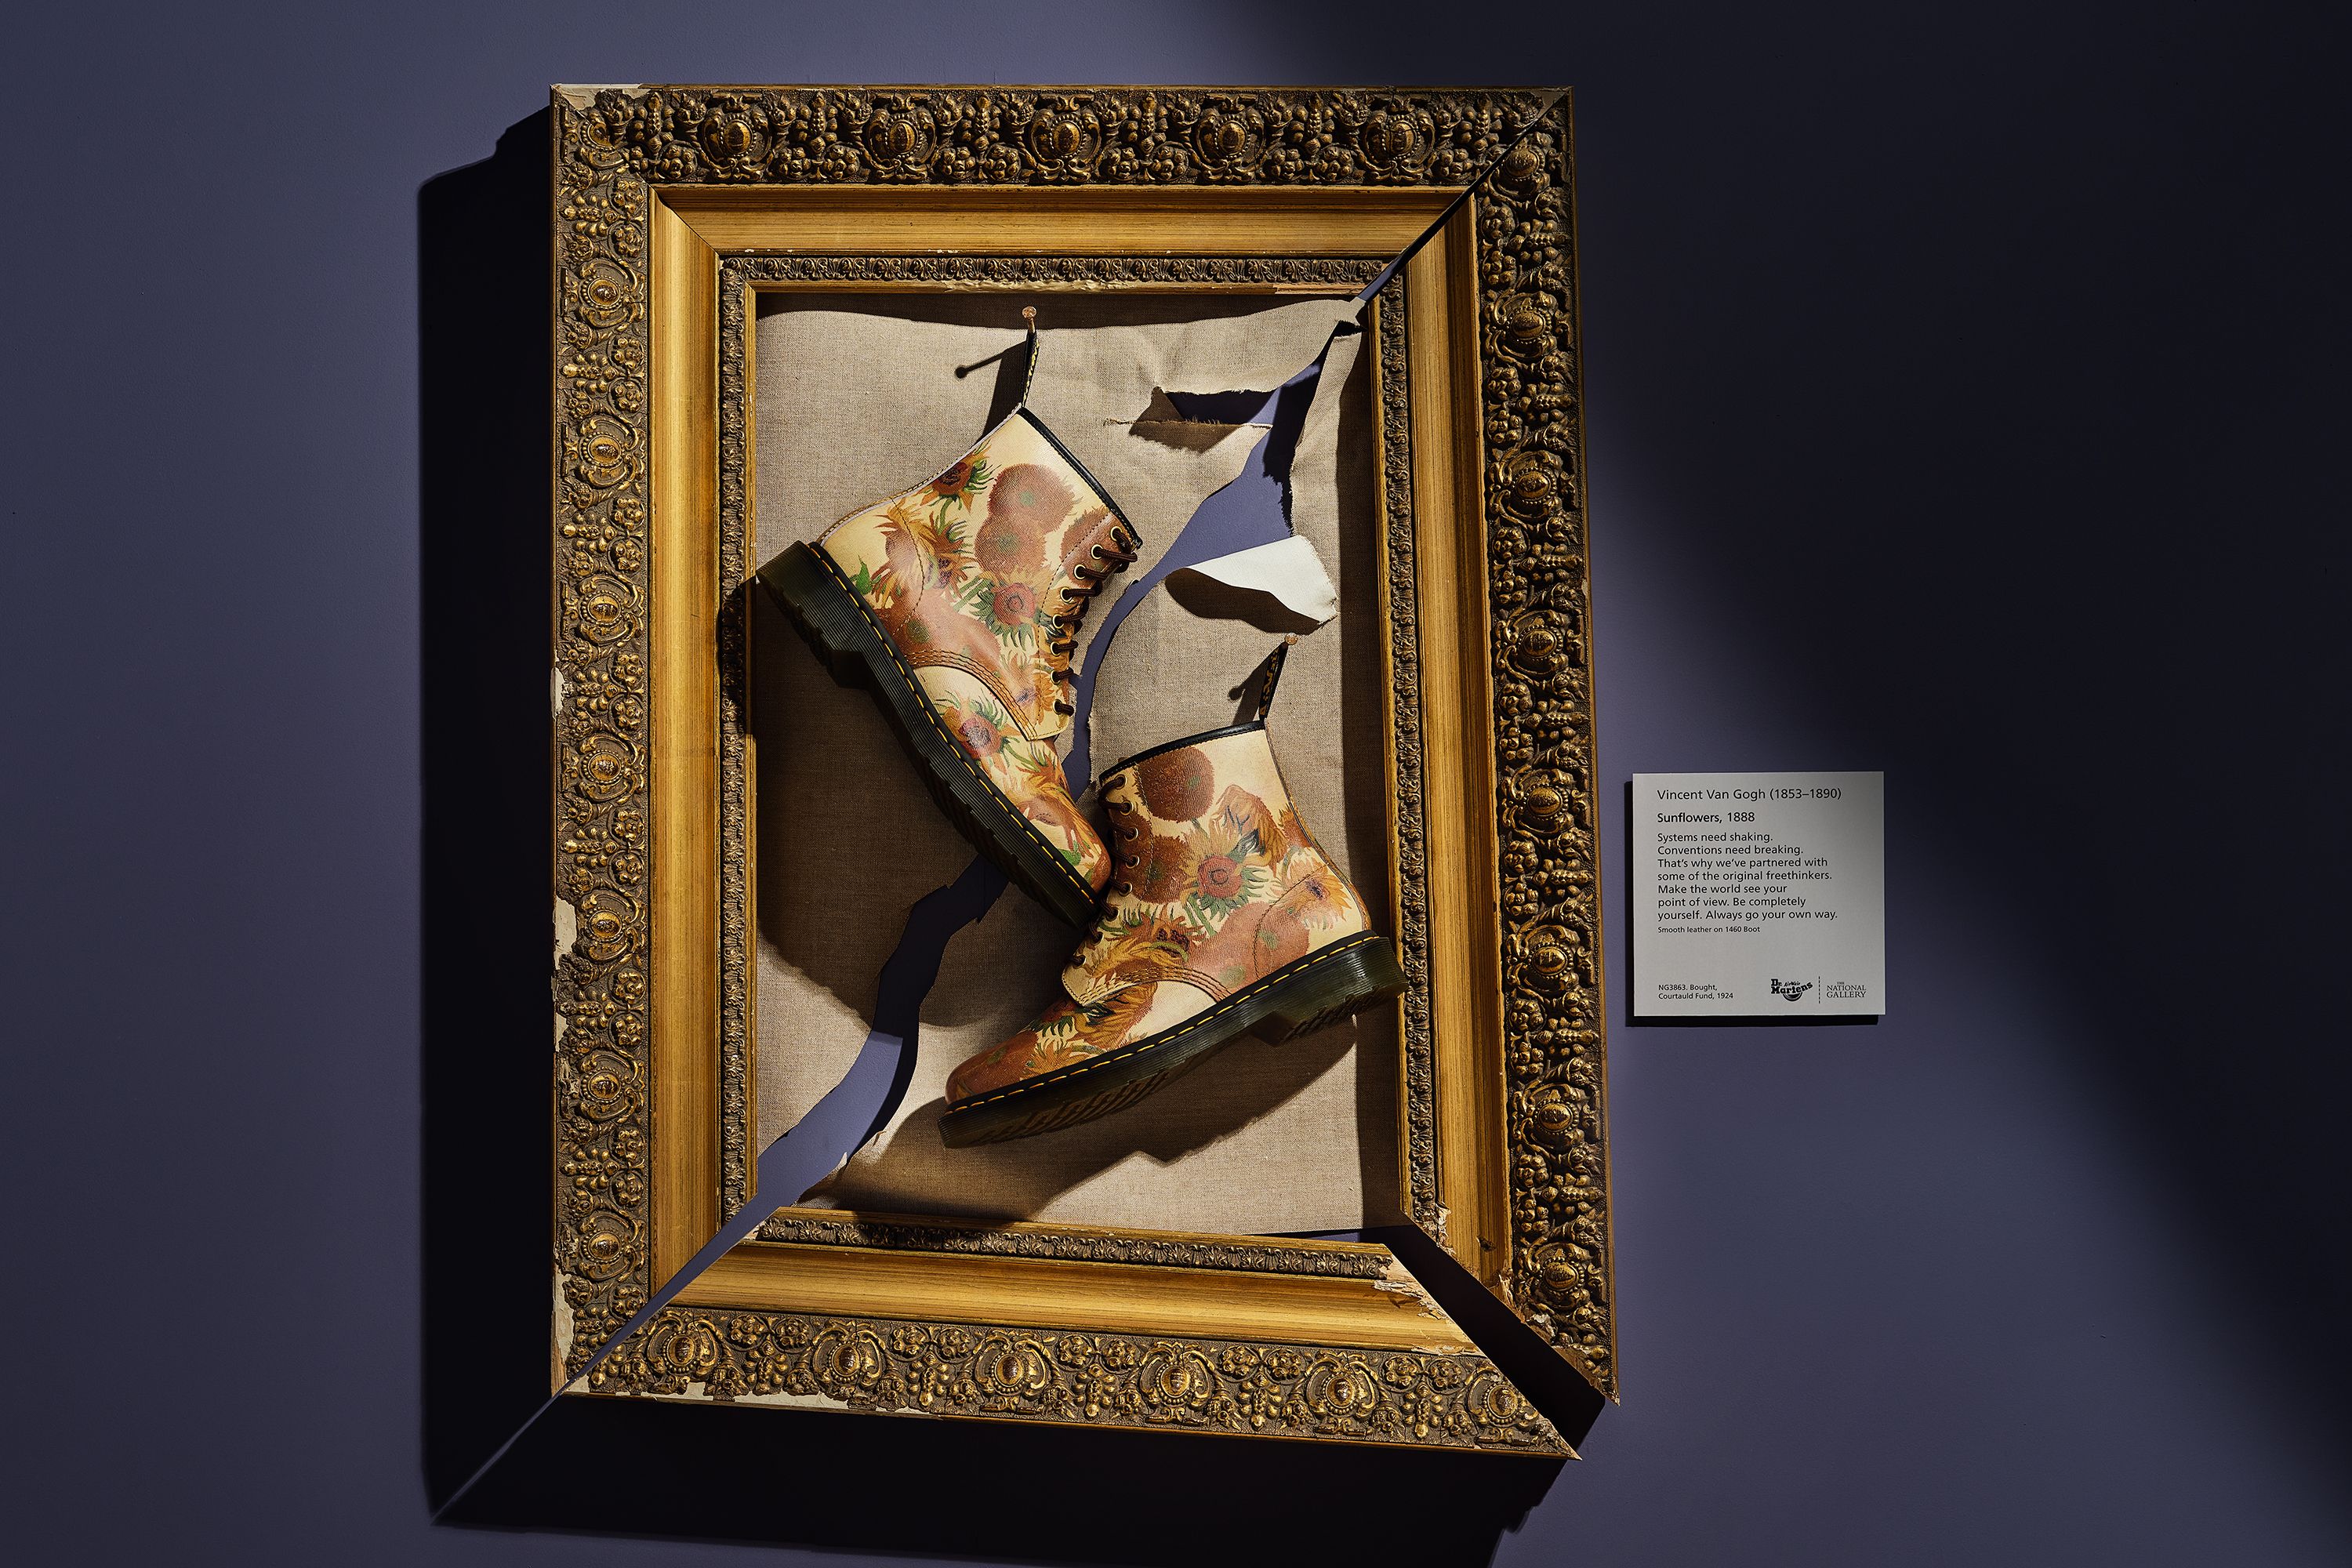 Dr. Martens and the National Gallery celebrate the legacy of 